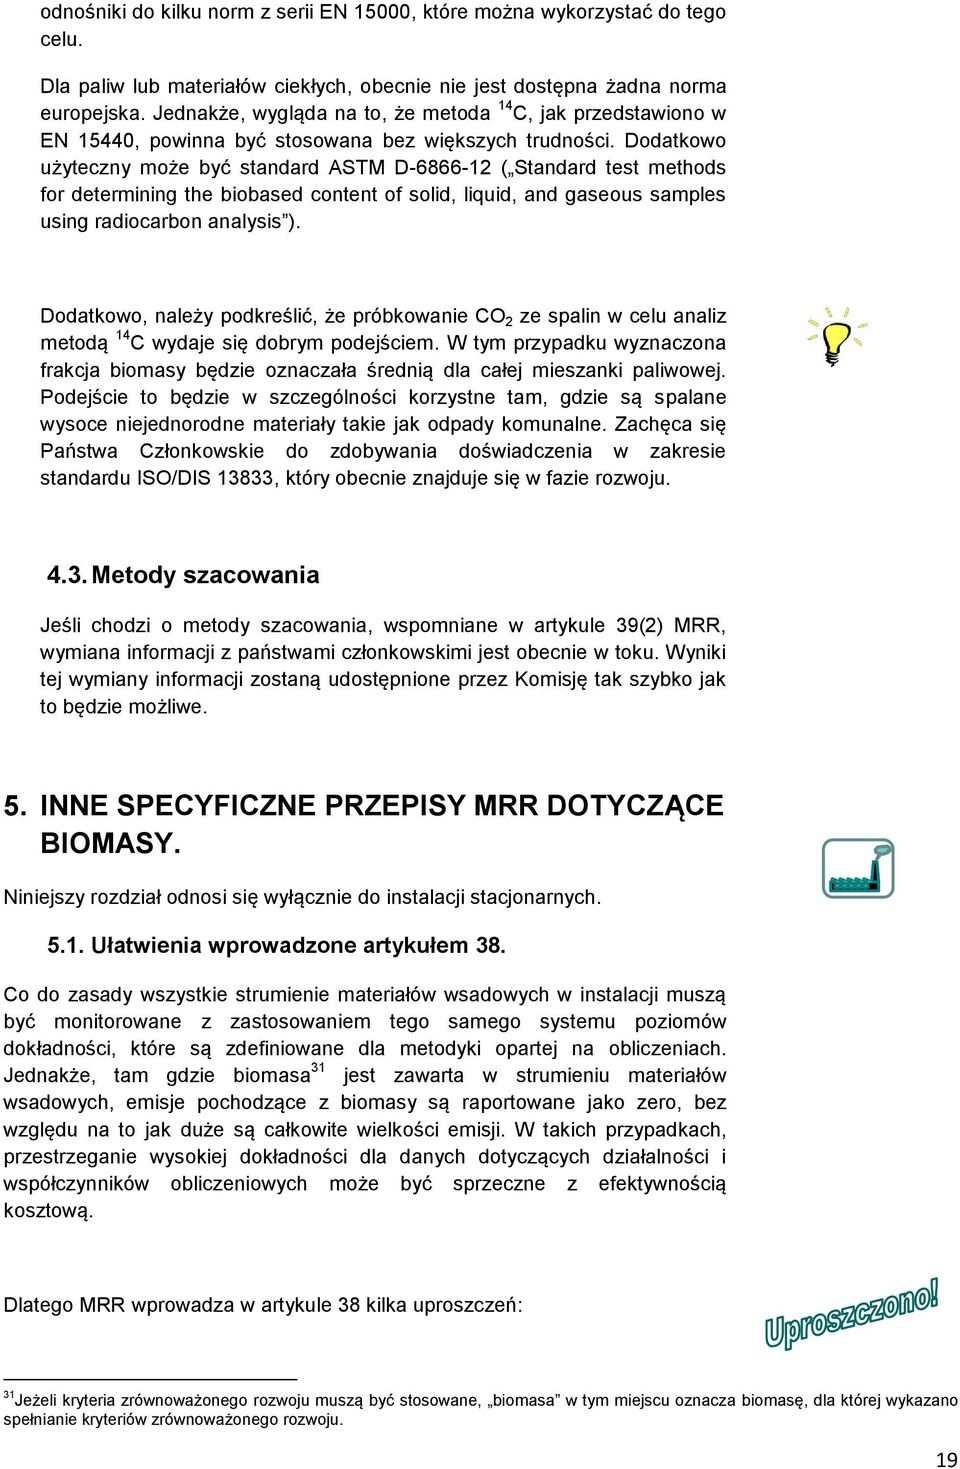 Dodatkowo użyteczny może być standard ASTM D-6866-12 ( Standard test methods for determining the biobased content of solid, liquid, and gaseous samples using radiocarbon analysis ).